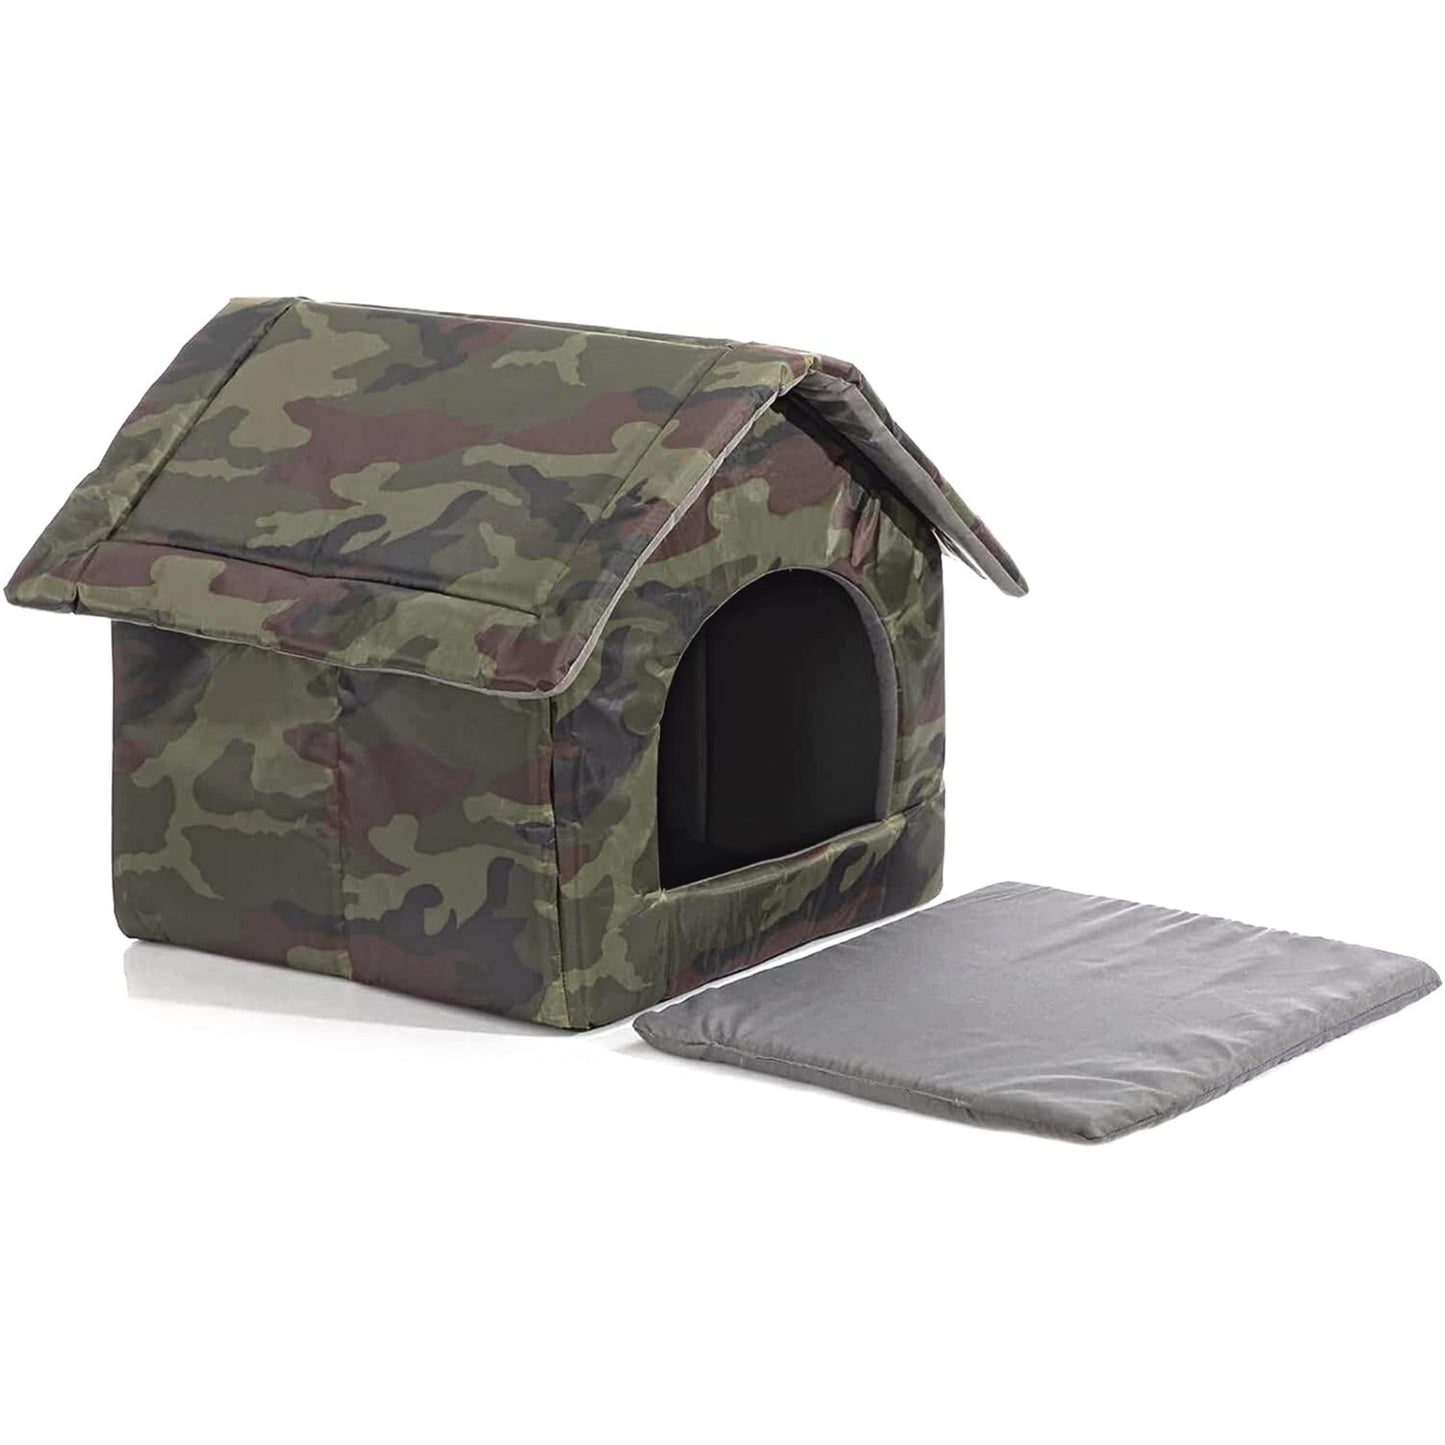 Foodie Puppies Soft & Foldable Army Print Hut for Puppies & Dogs (Large)